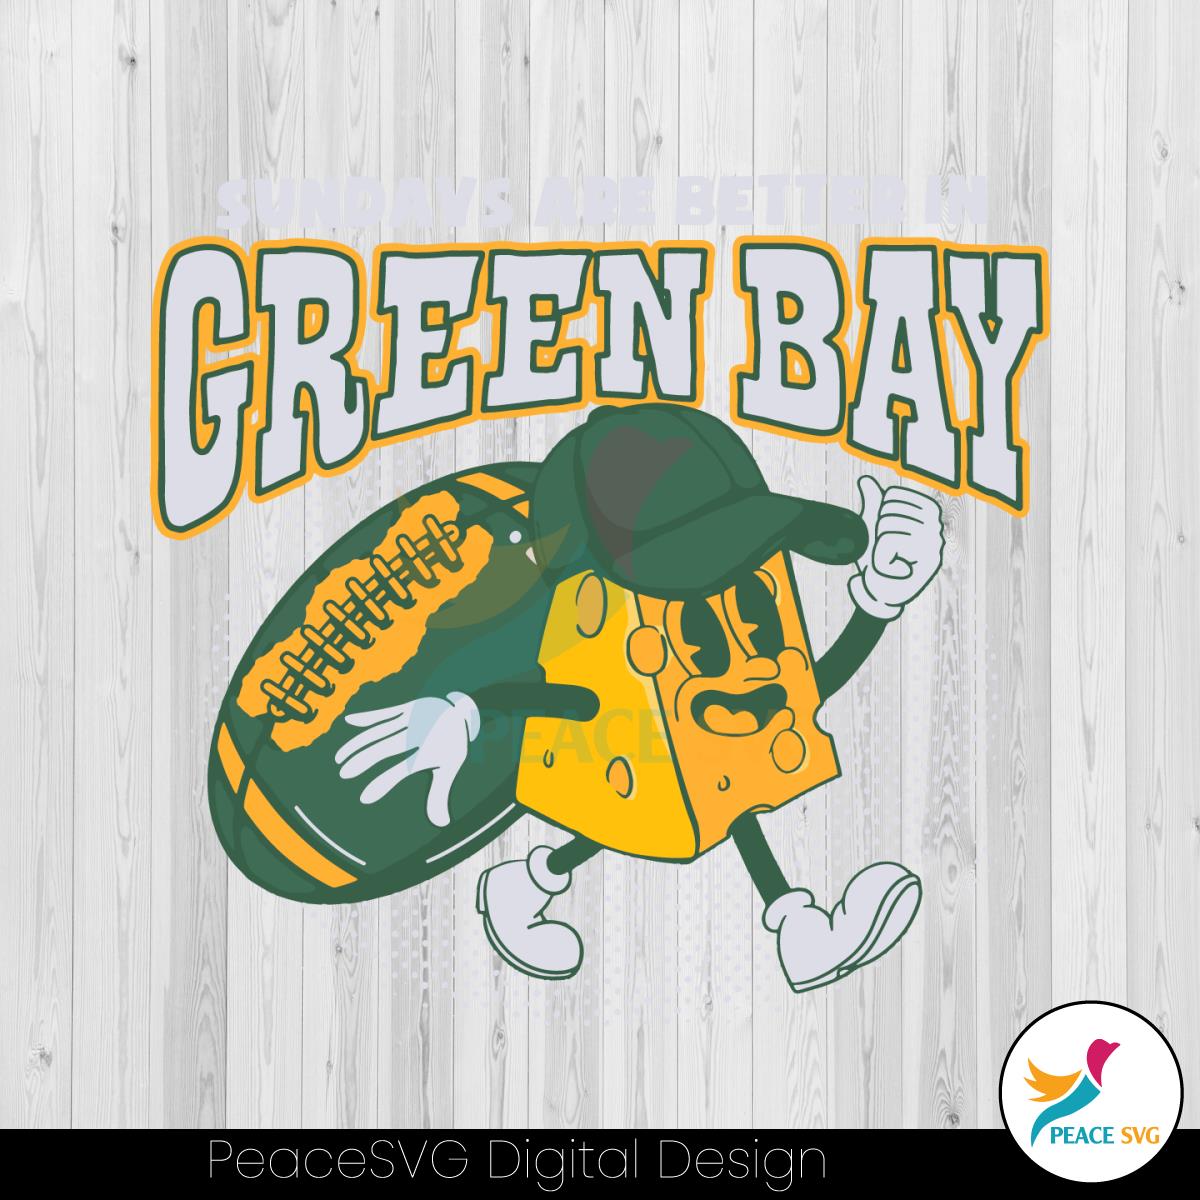 sundays-are-better-in-green-bay-football-svg-cutting-file